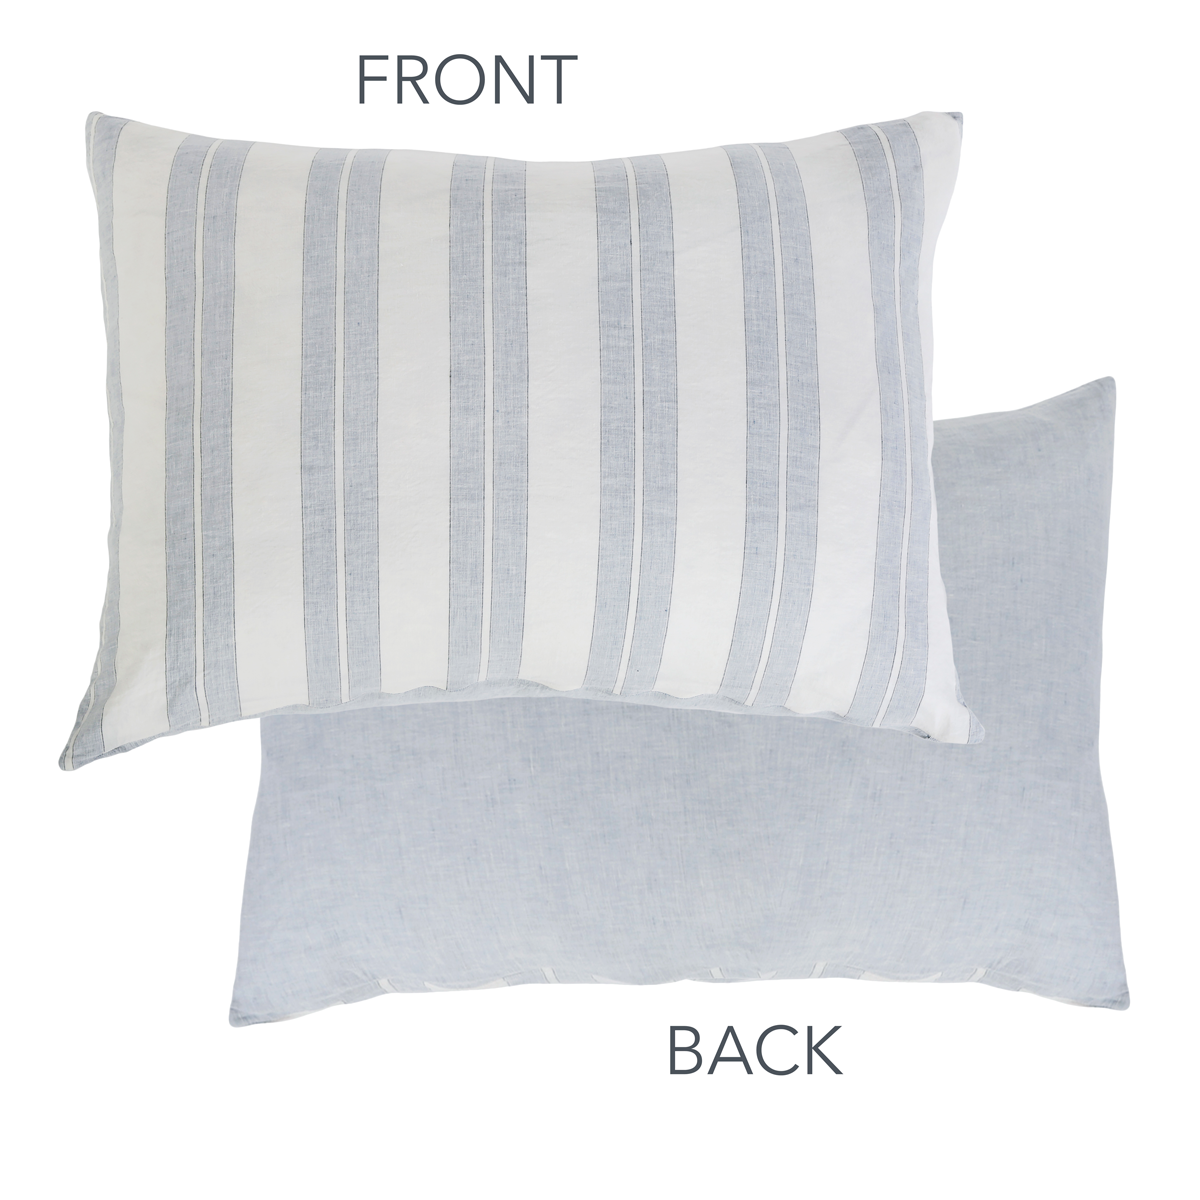 CARTER BIG PILLOW 28&quot; X 36&quot; WITH INSERT - Ivory Denim - Pom Pom at Home